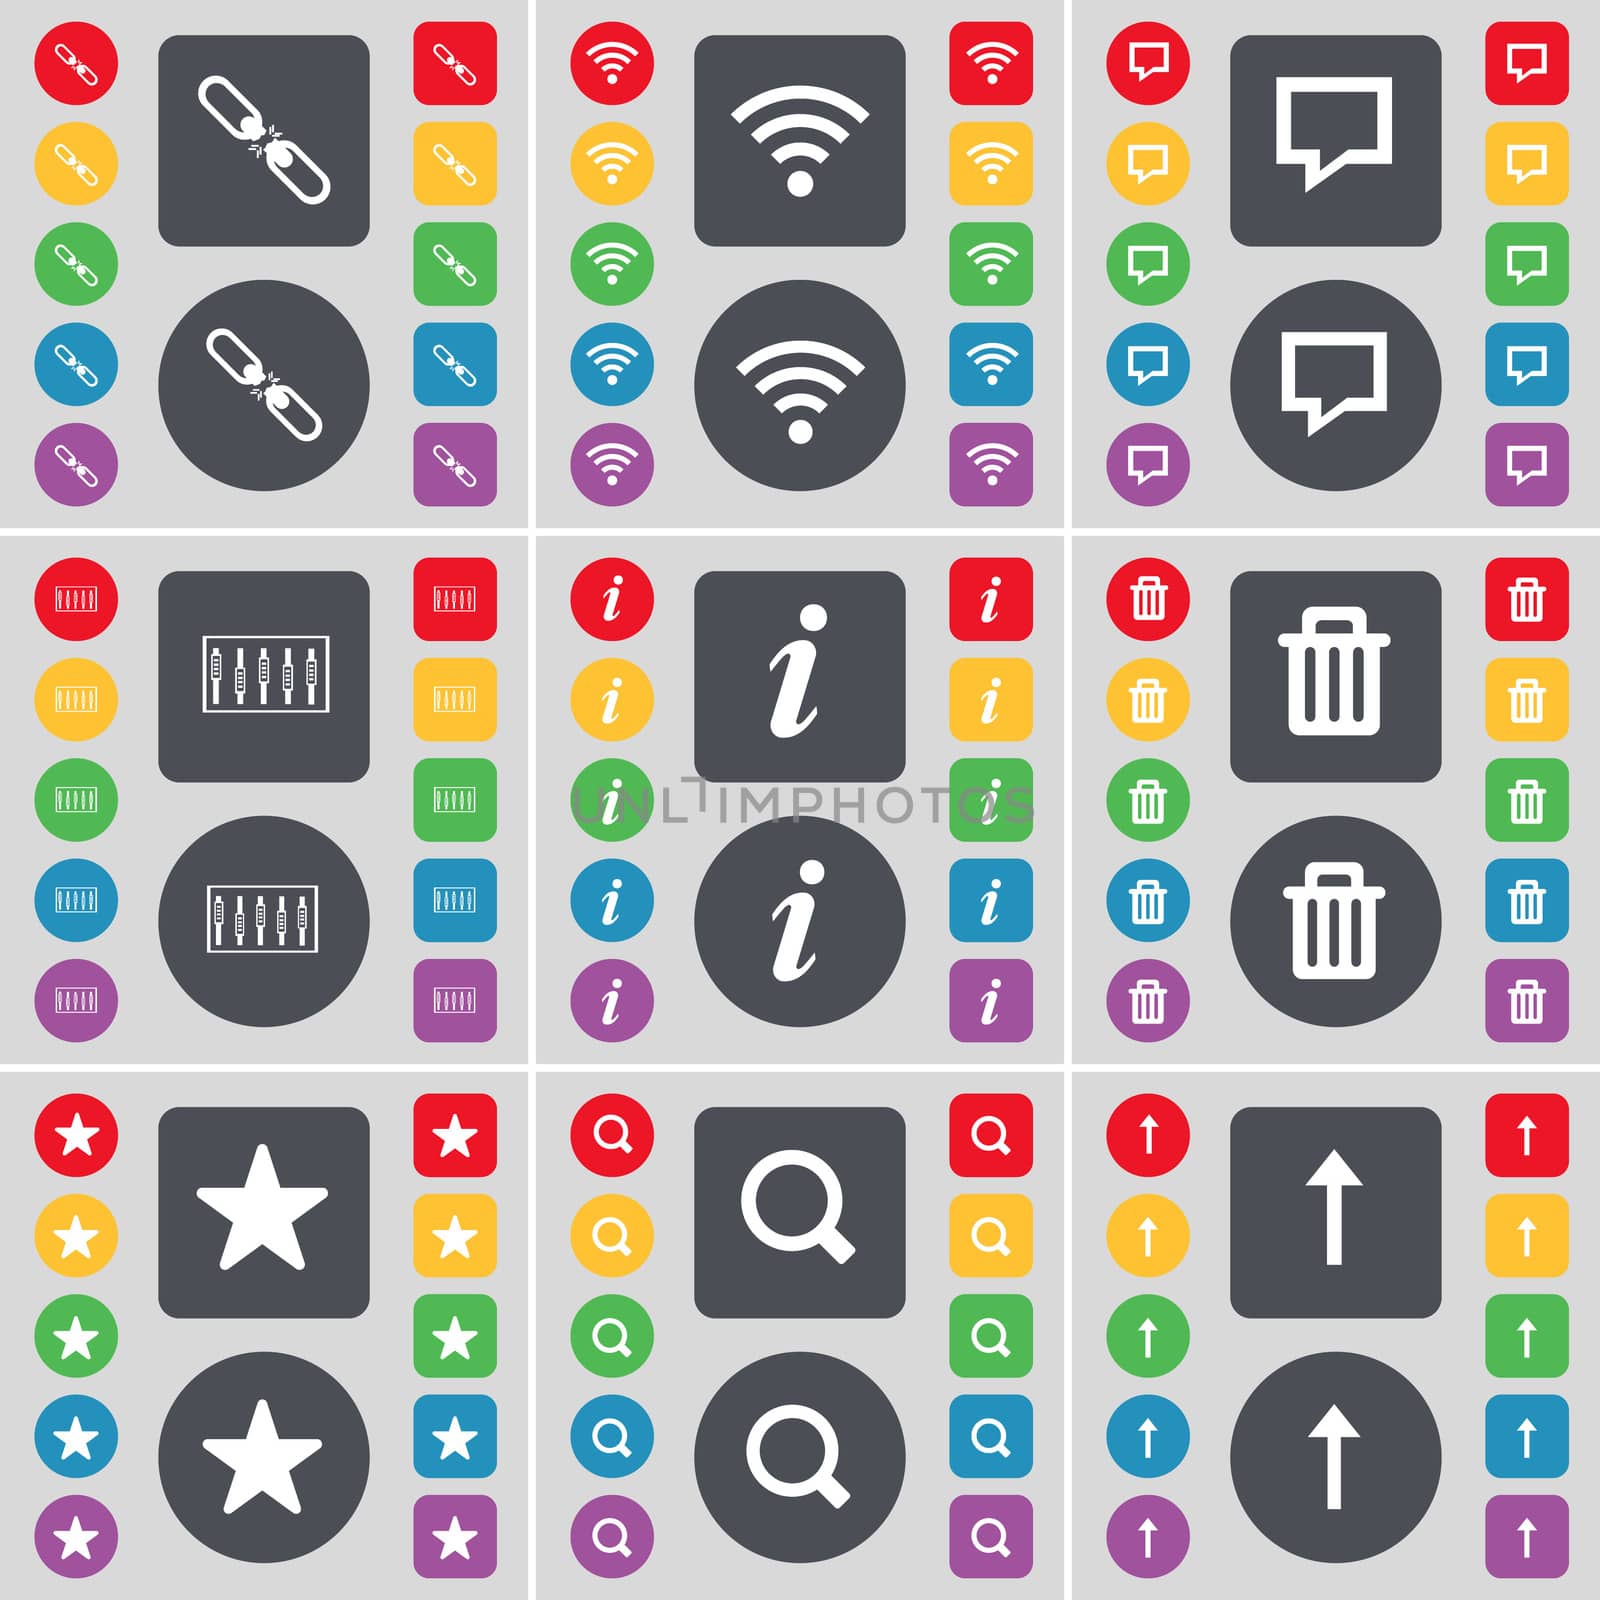 Link, Wi-Fi, Chat bubble, Equalizer, Information, Trash can, Star, Magnifying glass, Arrow up icon symbol. A large set of flat, colored buttons for your design. illustration